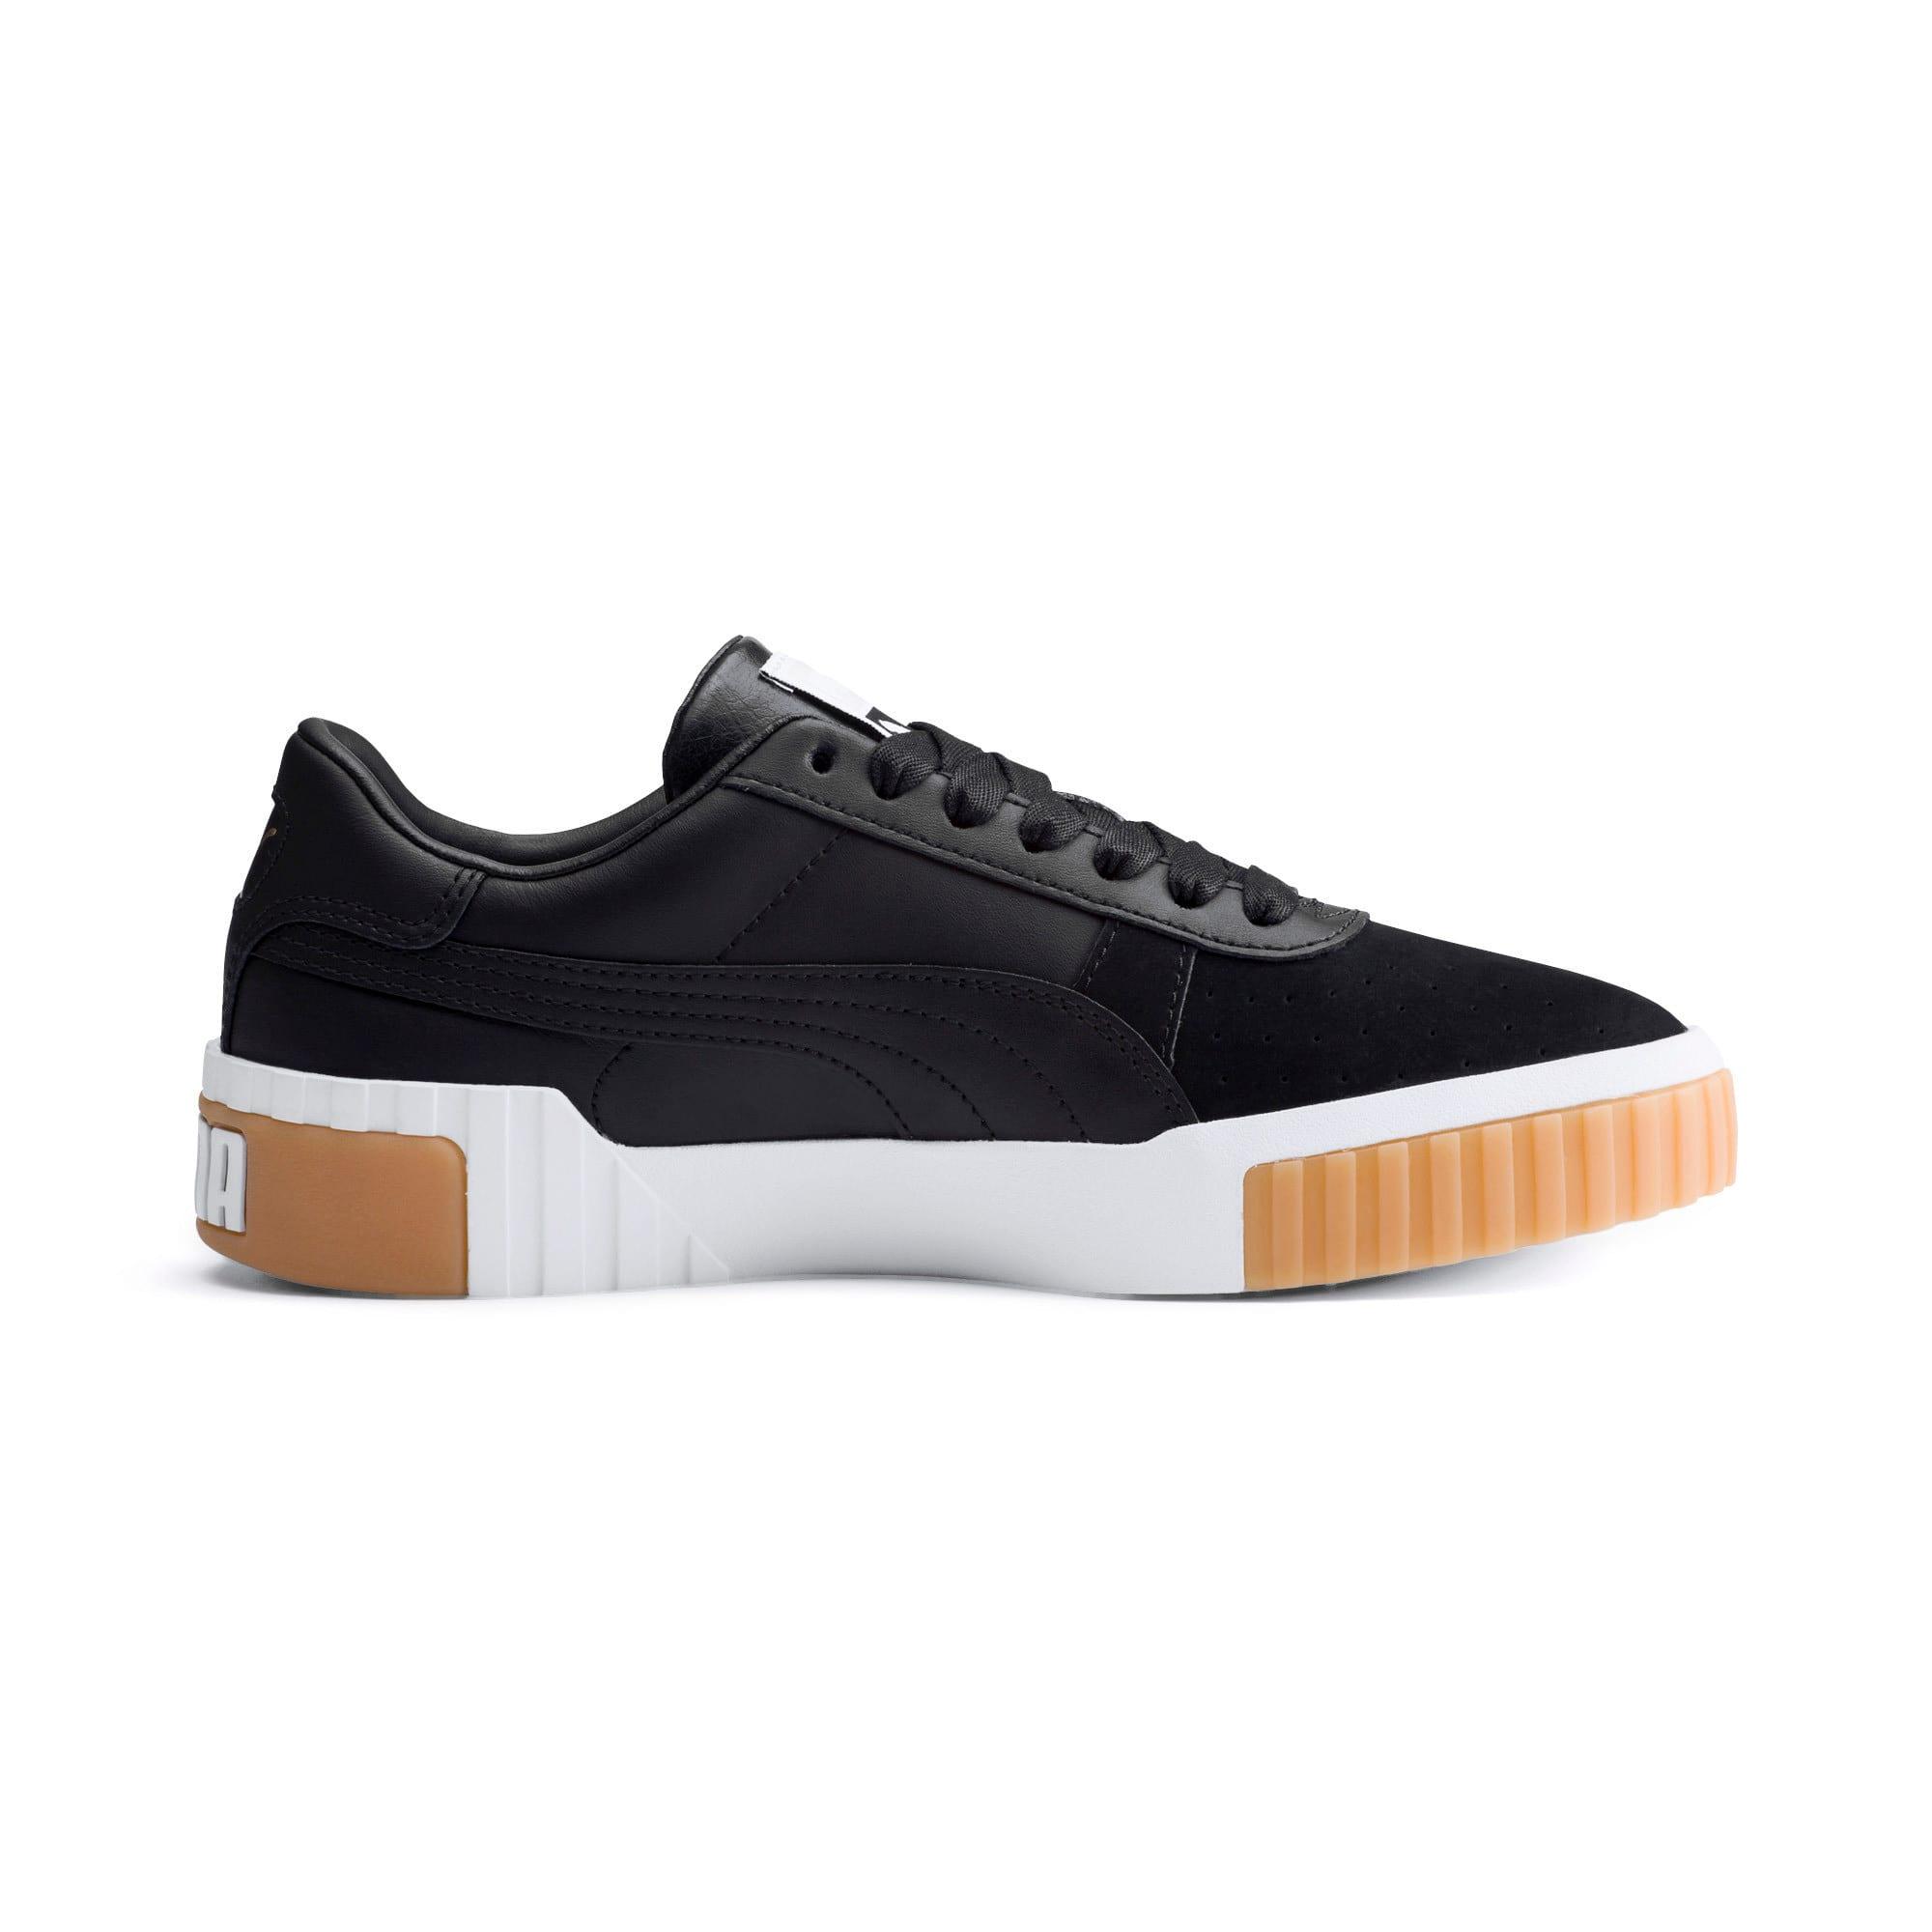 PUMA Leather Cali Exotic Women's Sneakers in Black - Lyst